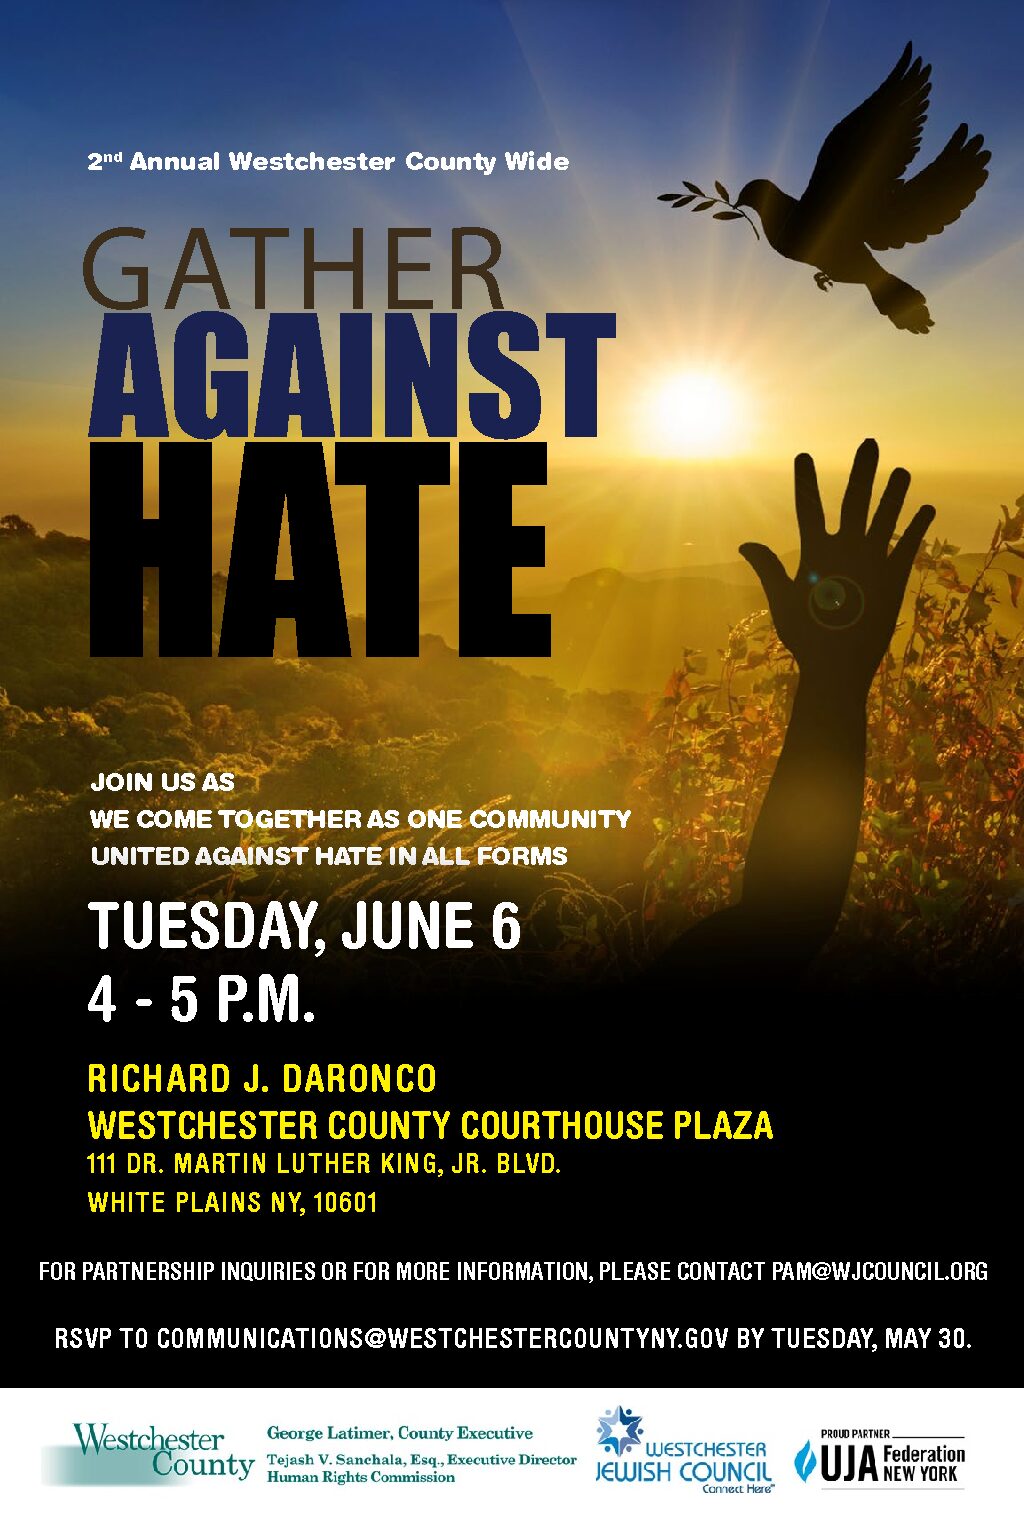 Westchester County Wide Gathering Against Hate